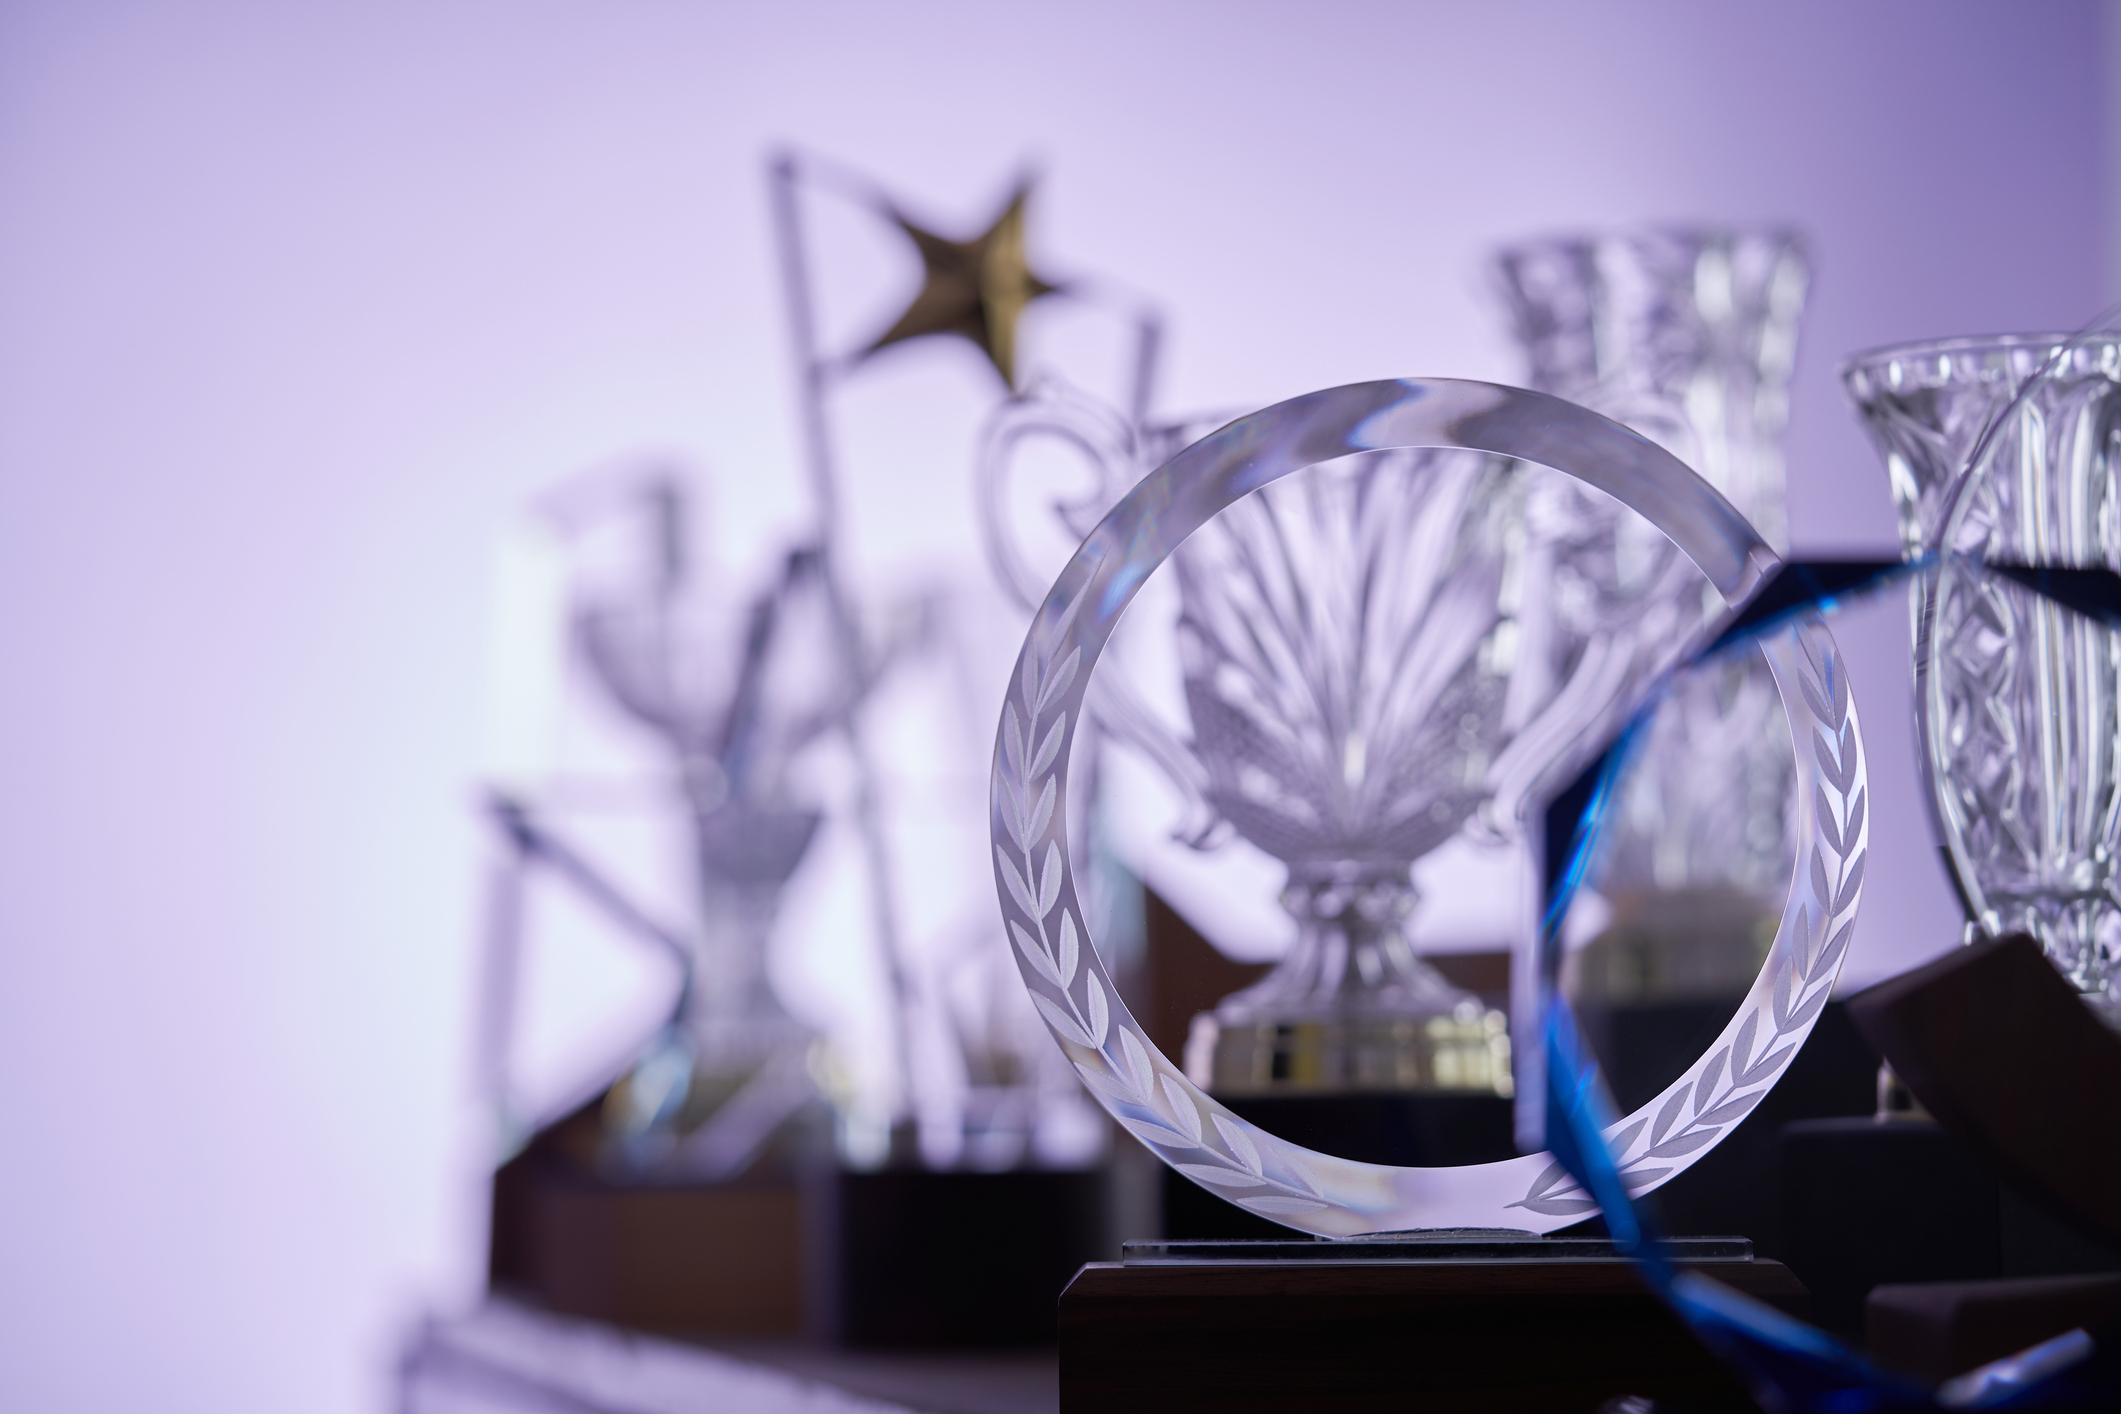 New awards page showcases IRWD’s customer-driven achievements